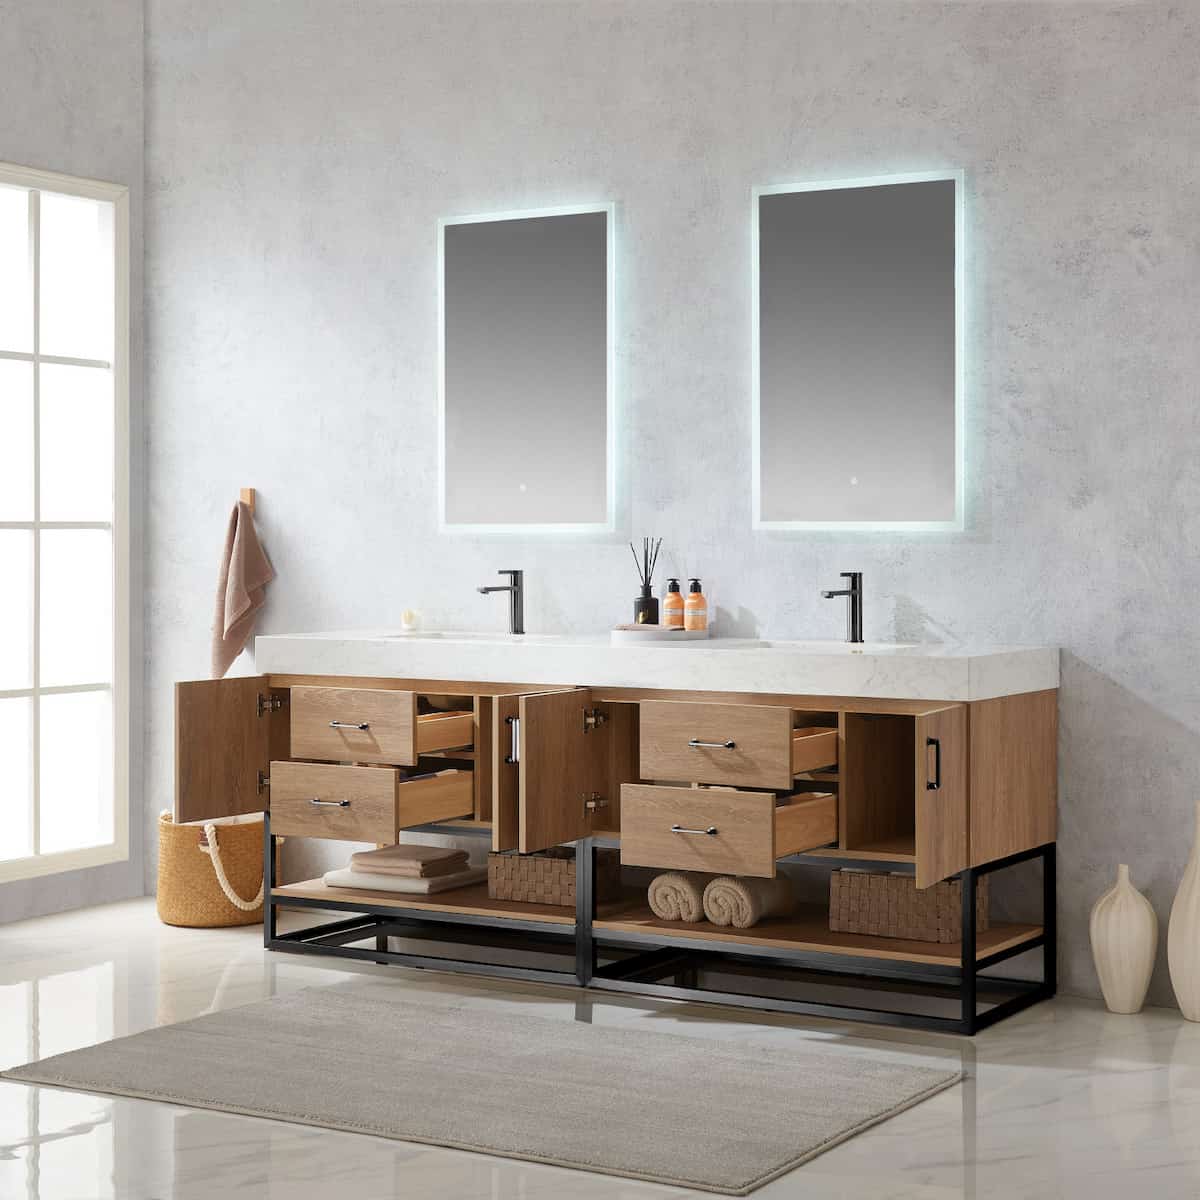 Vinnova Alistair 84 Inch Freestanding Double Vanity in North American Oak and Matte Black Frame with White Grain Stone Countertop With Mirrors Inside 789084B-NO-GW